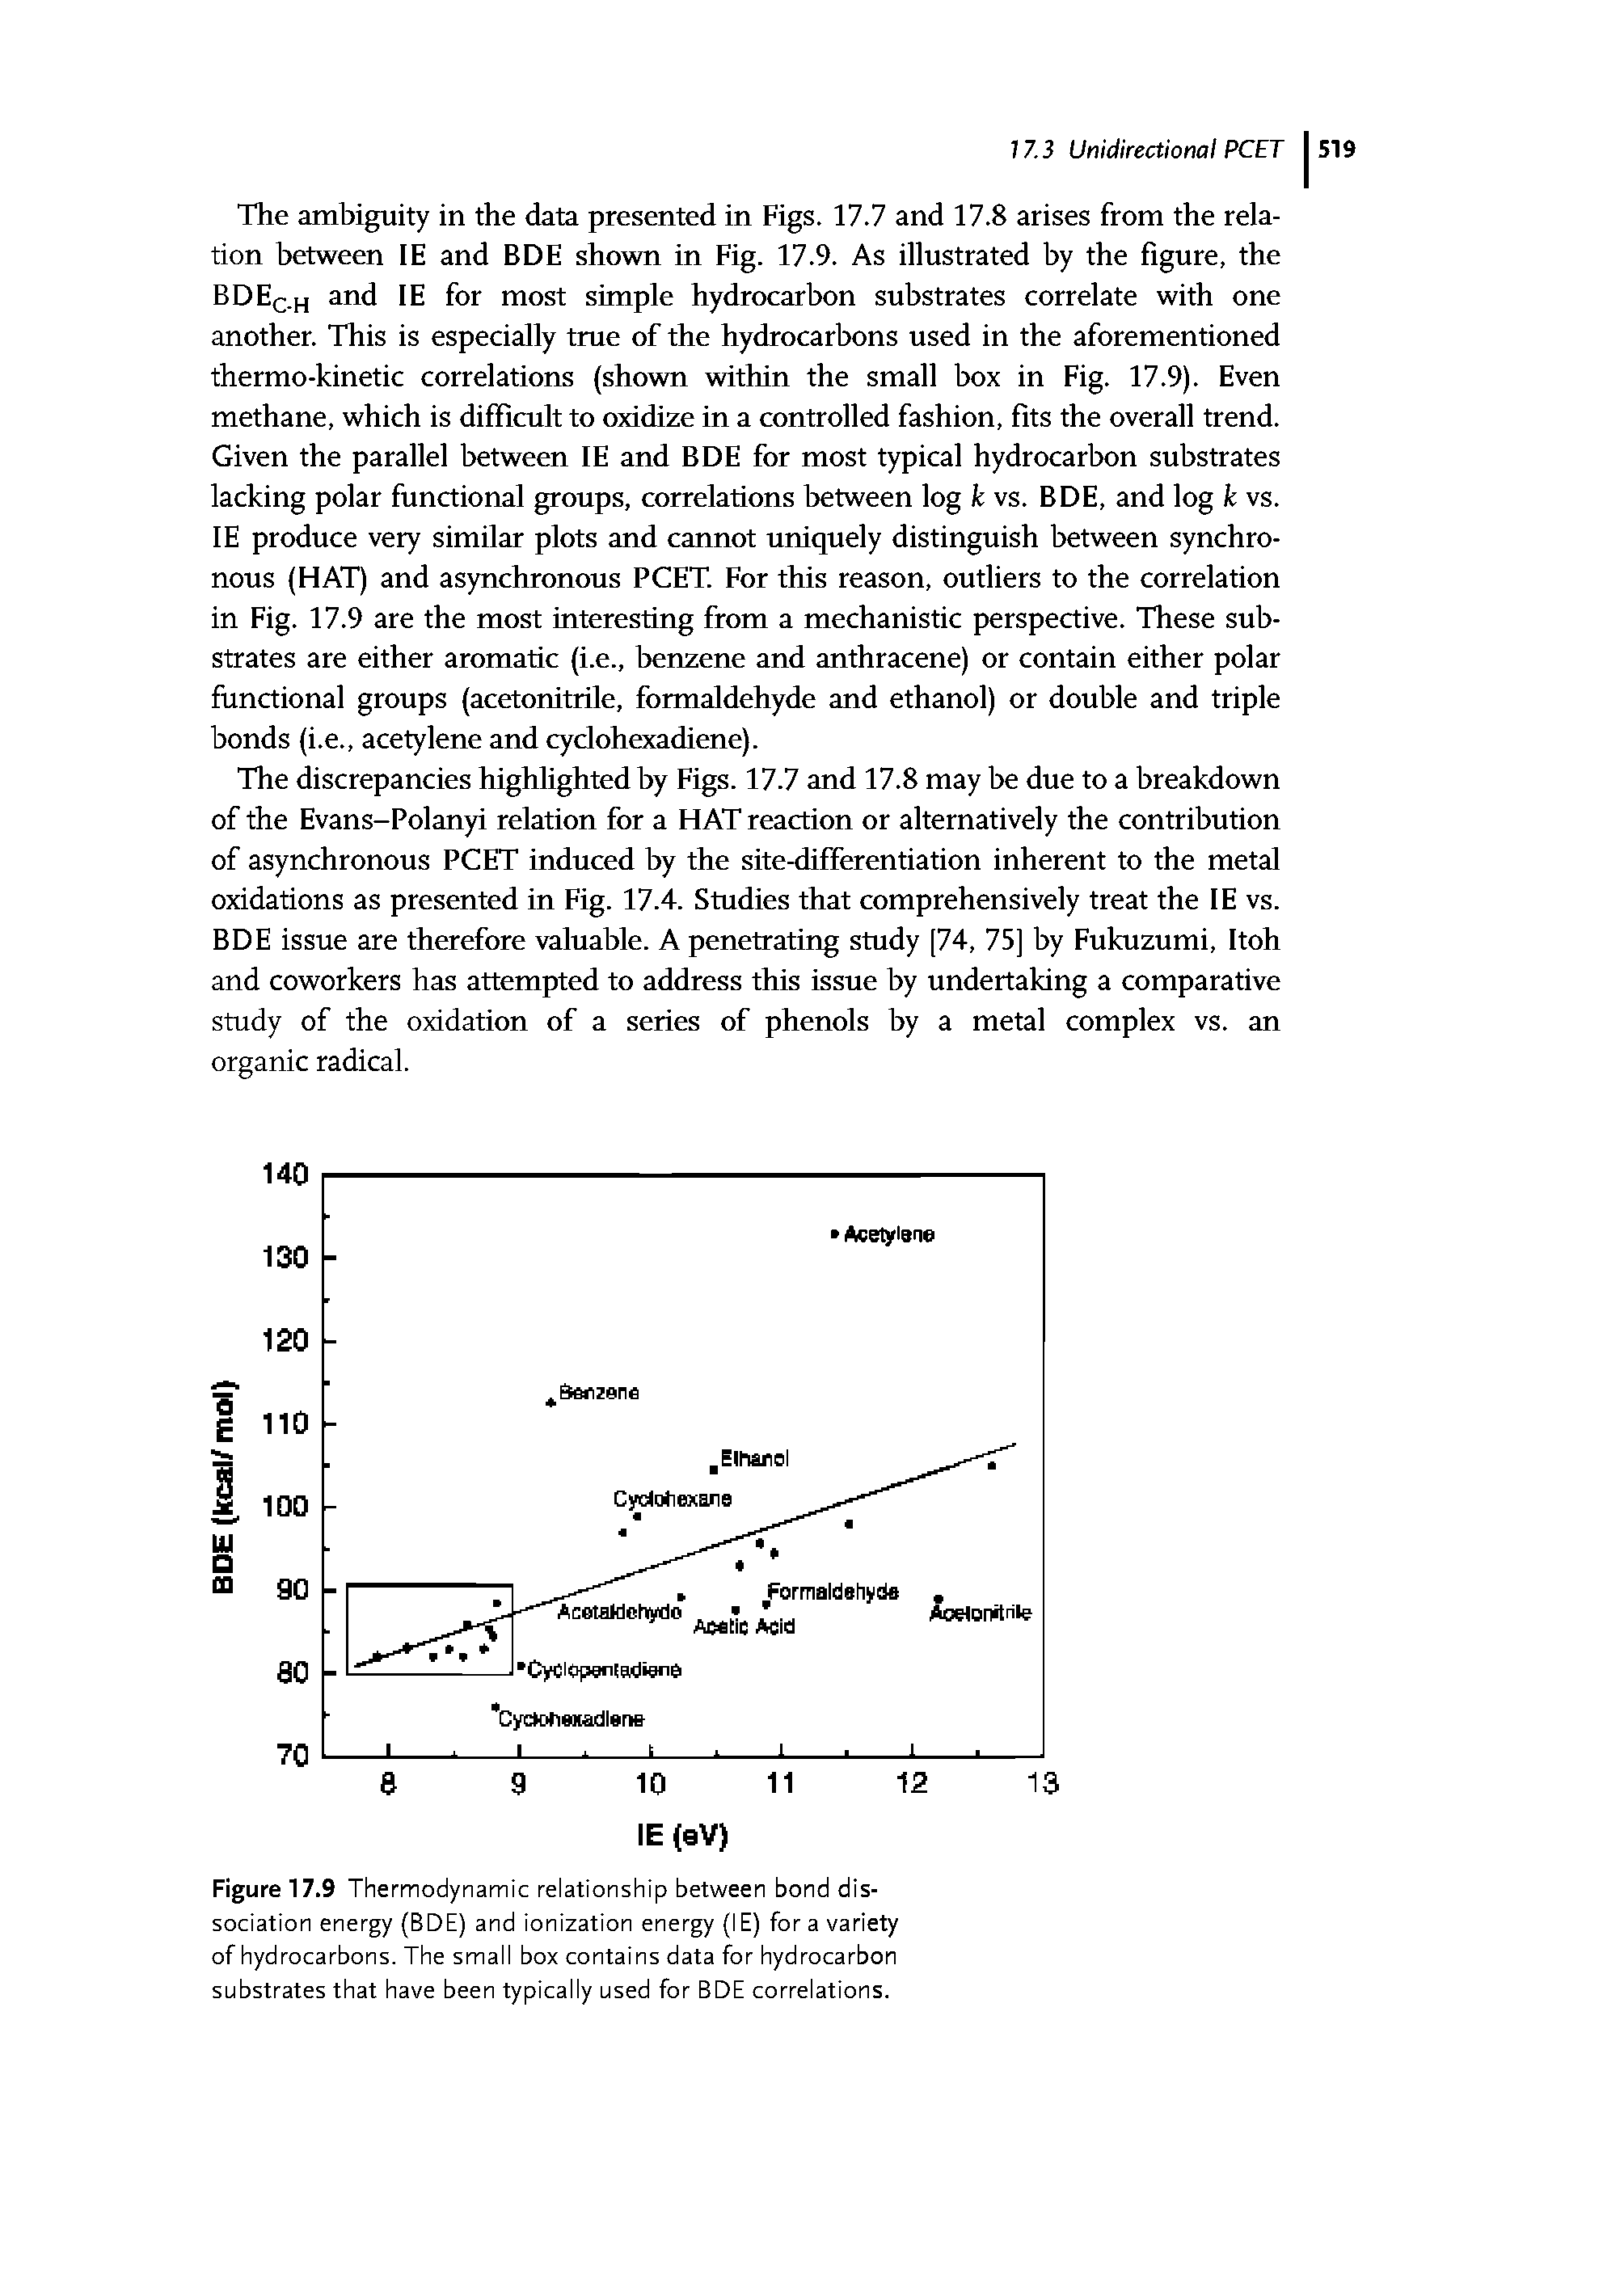 Figure 17.9 Thermodynamic relationship between bond dissociation energy (BDE) and ionization energy (I E) for a variety of hydrocarbons. The small box contains data for hydrocarbon substrates that have been typically used for BDE correlations.